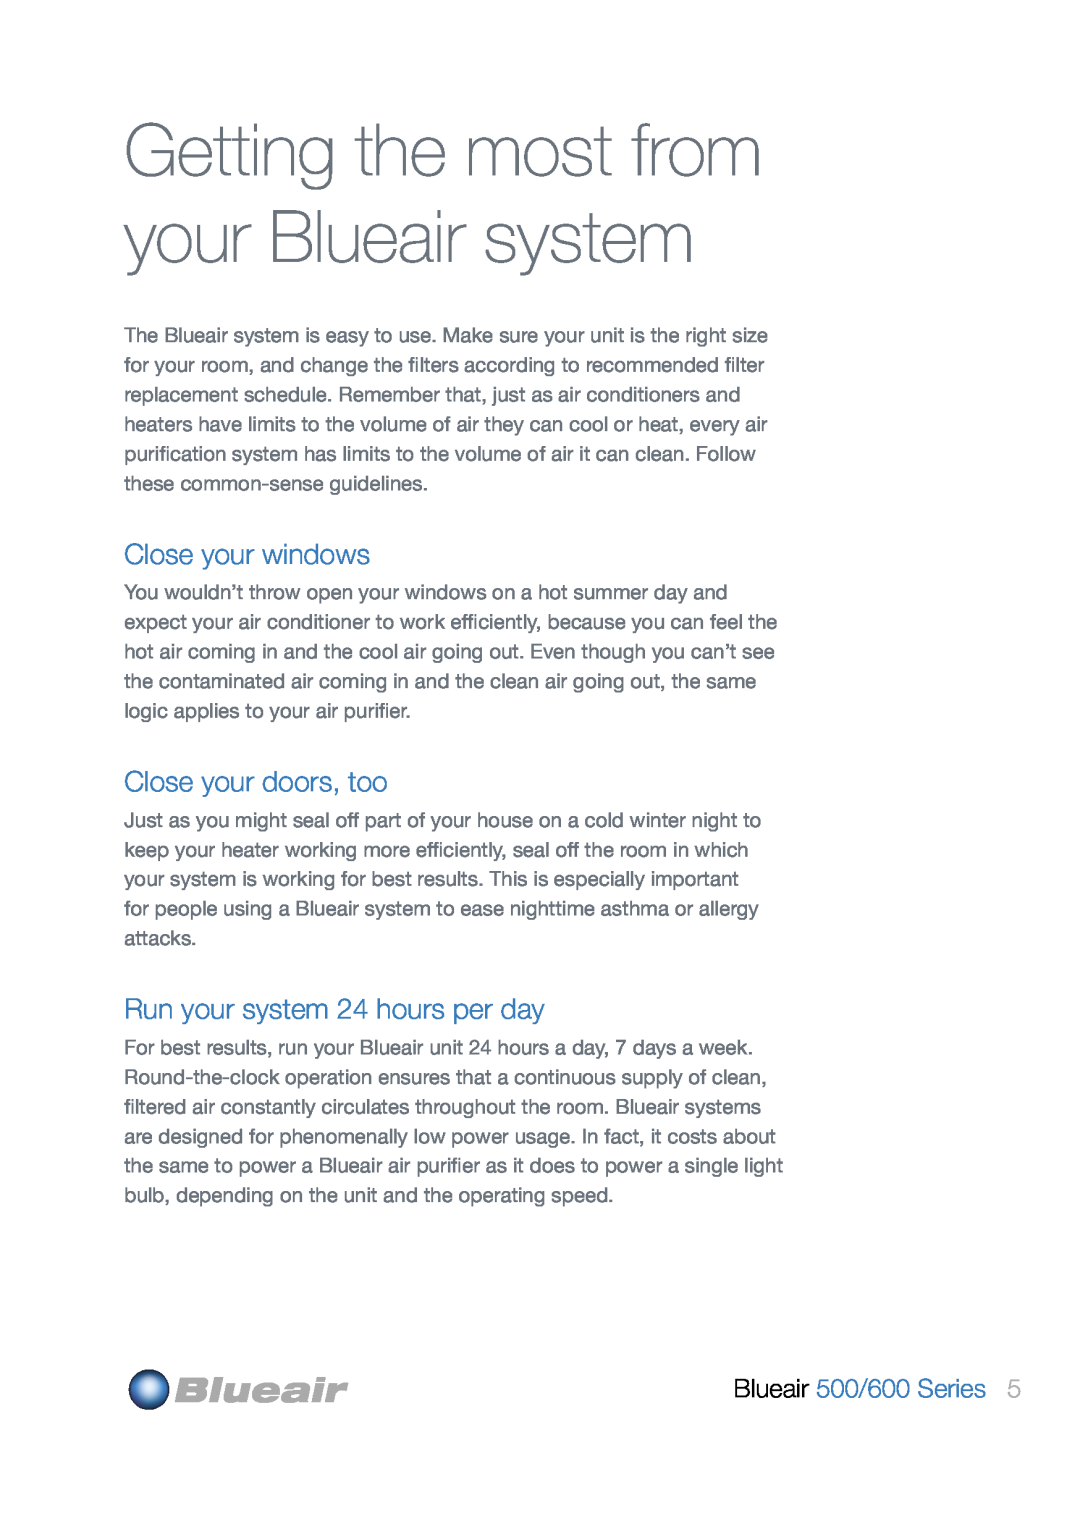 Blueair user manual Close your windows, Close your doors, too, Run your system 24 hours per day, Blueair 500/600 Series 